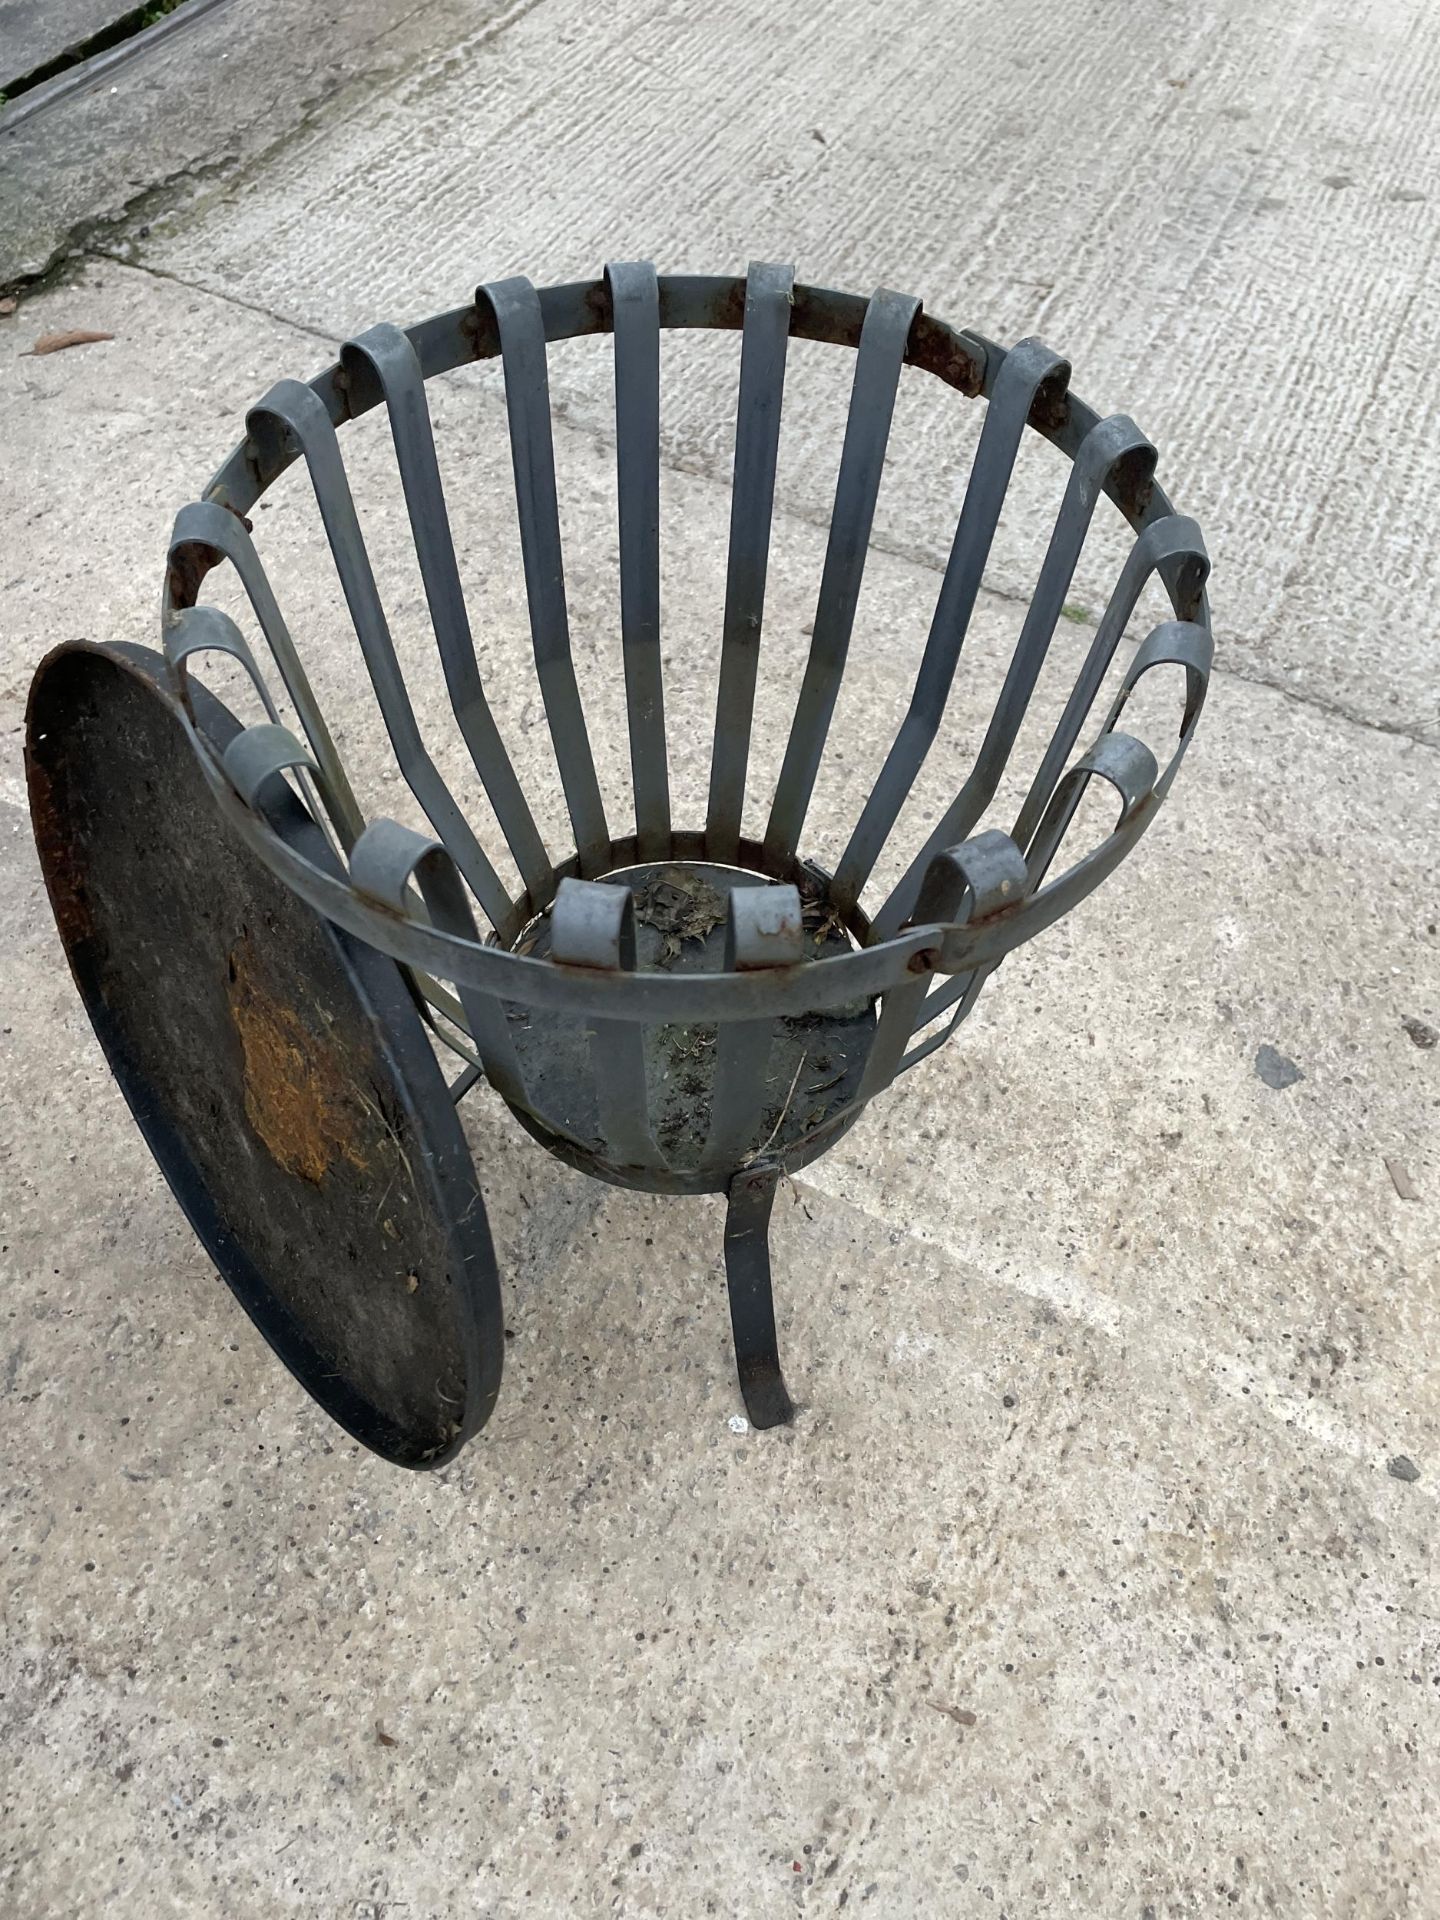 A SMAL METAL GARDEN FIRE PIT - Image 3 of 3